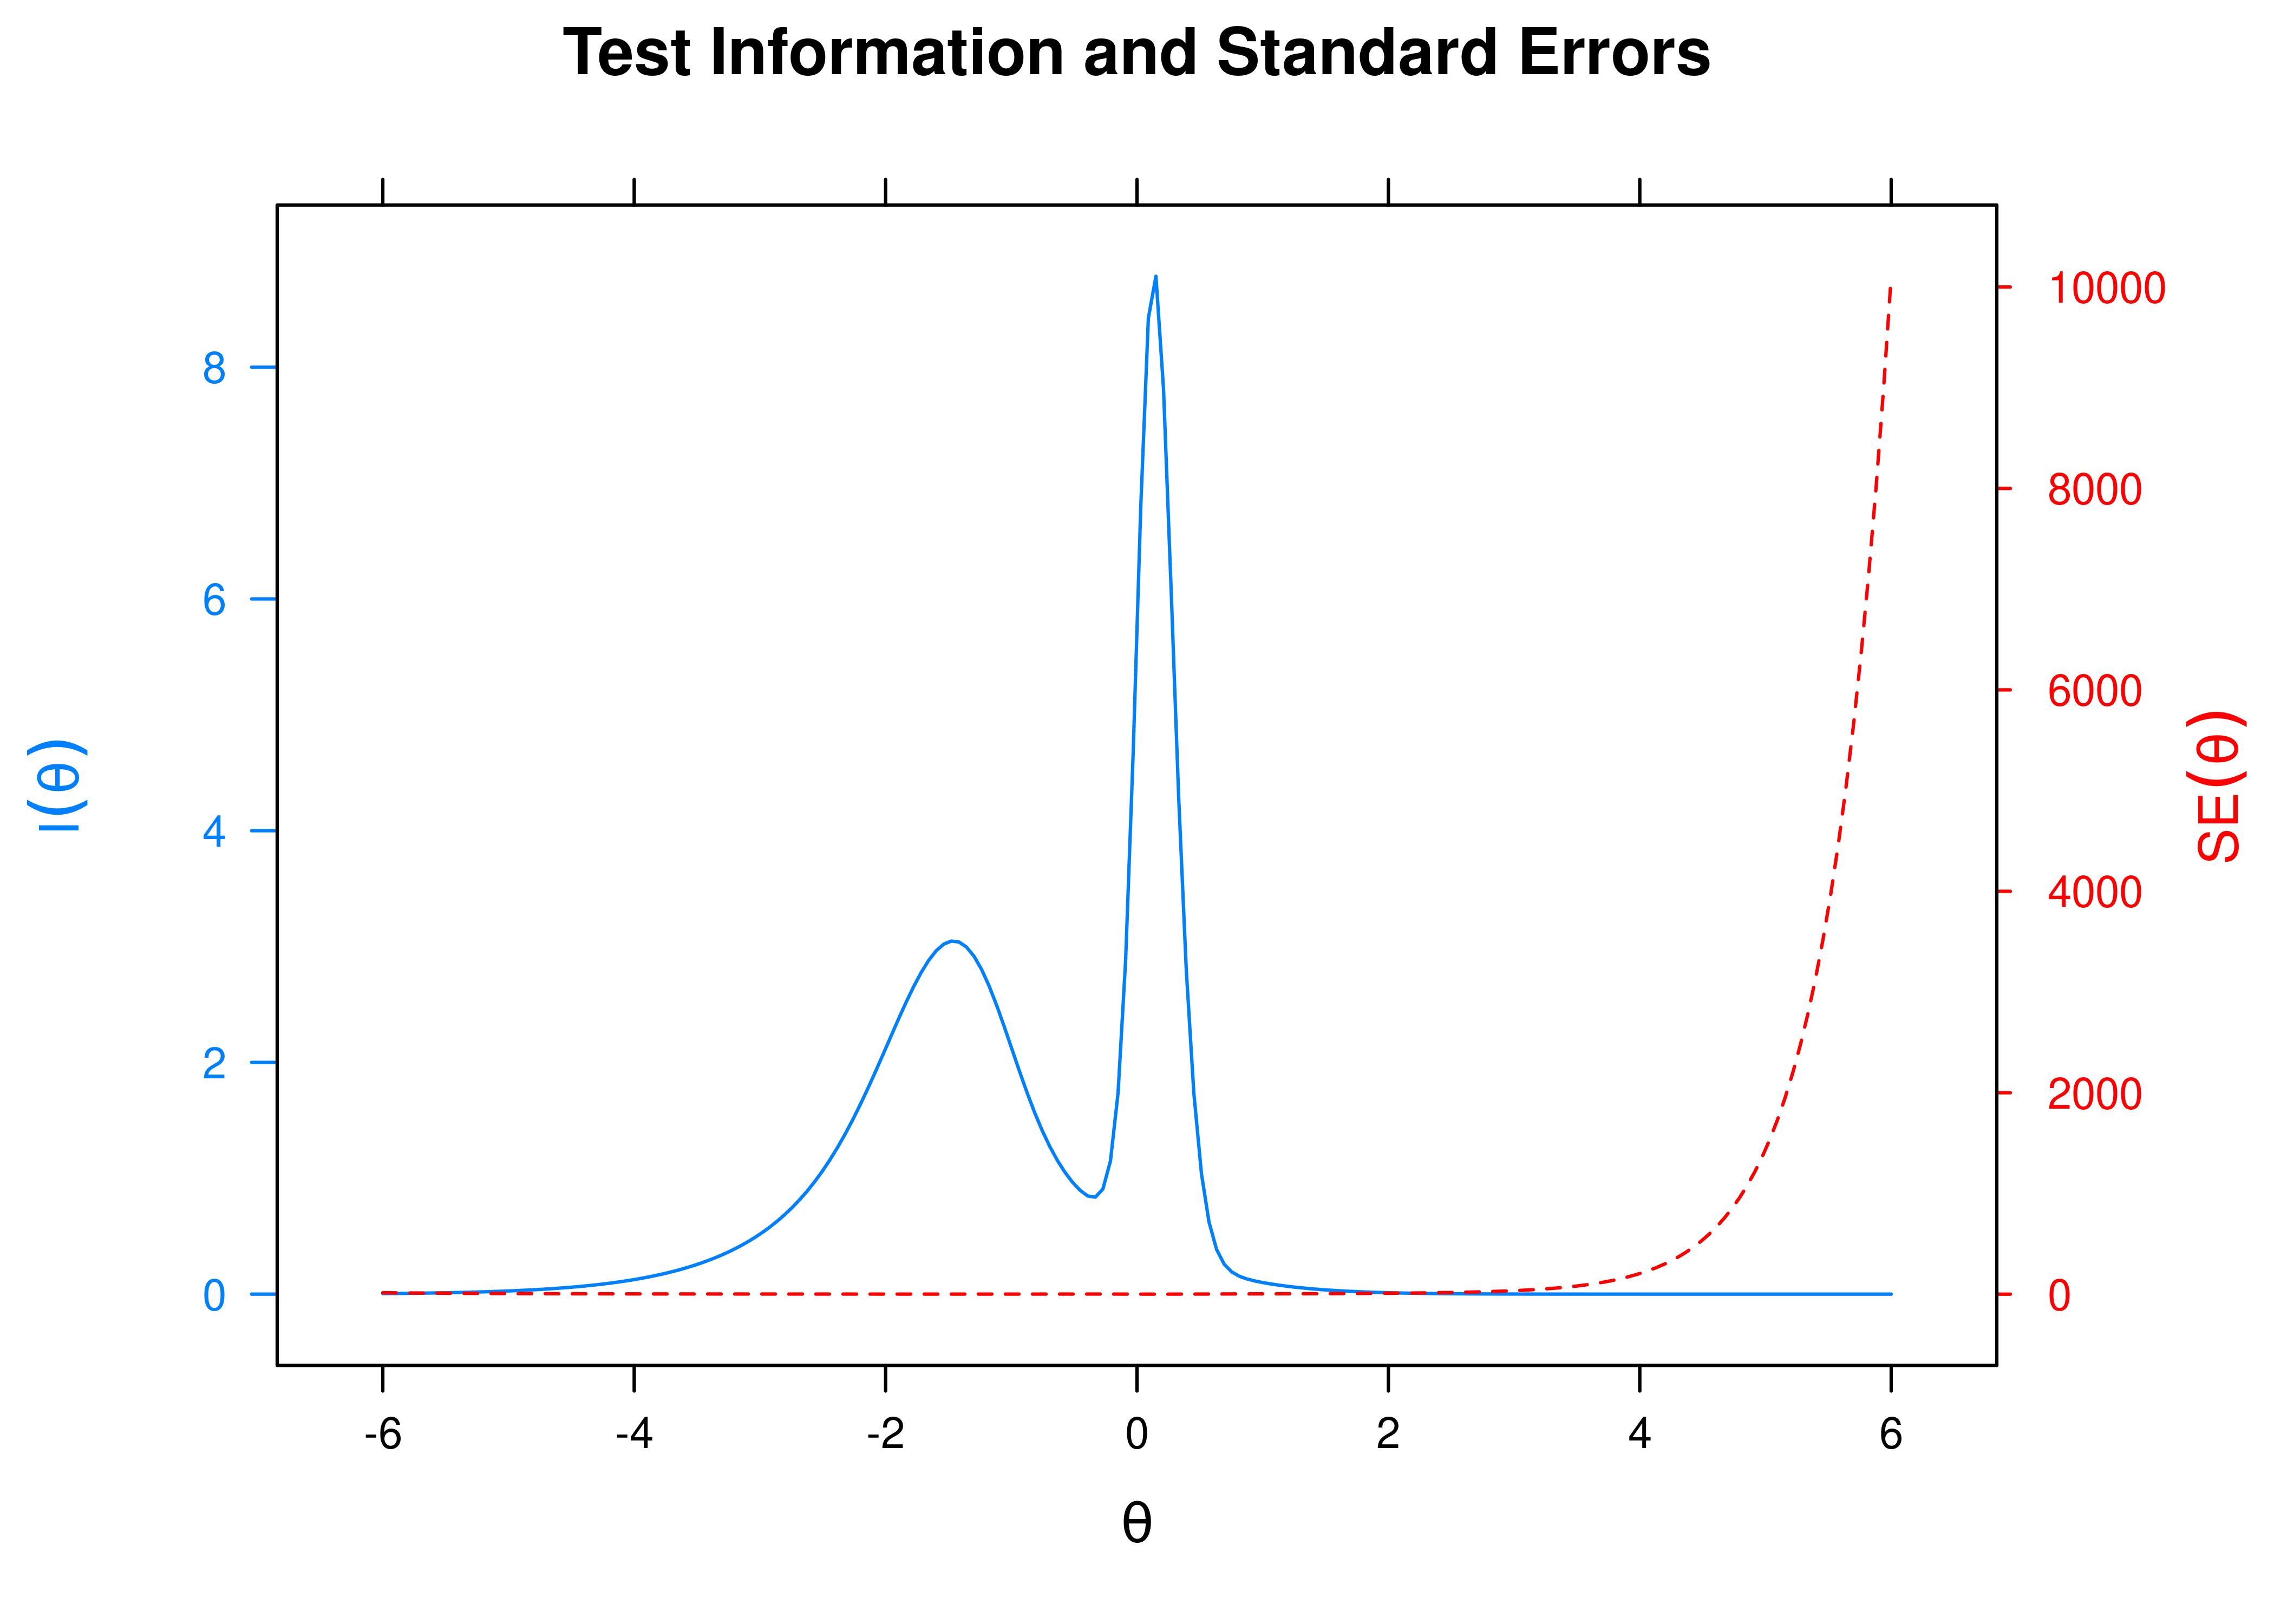 Test Information Curve and Standard Error of Measurement From Four-Parameter Logistic Item Response Theory Model.